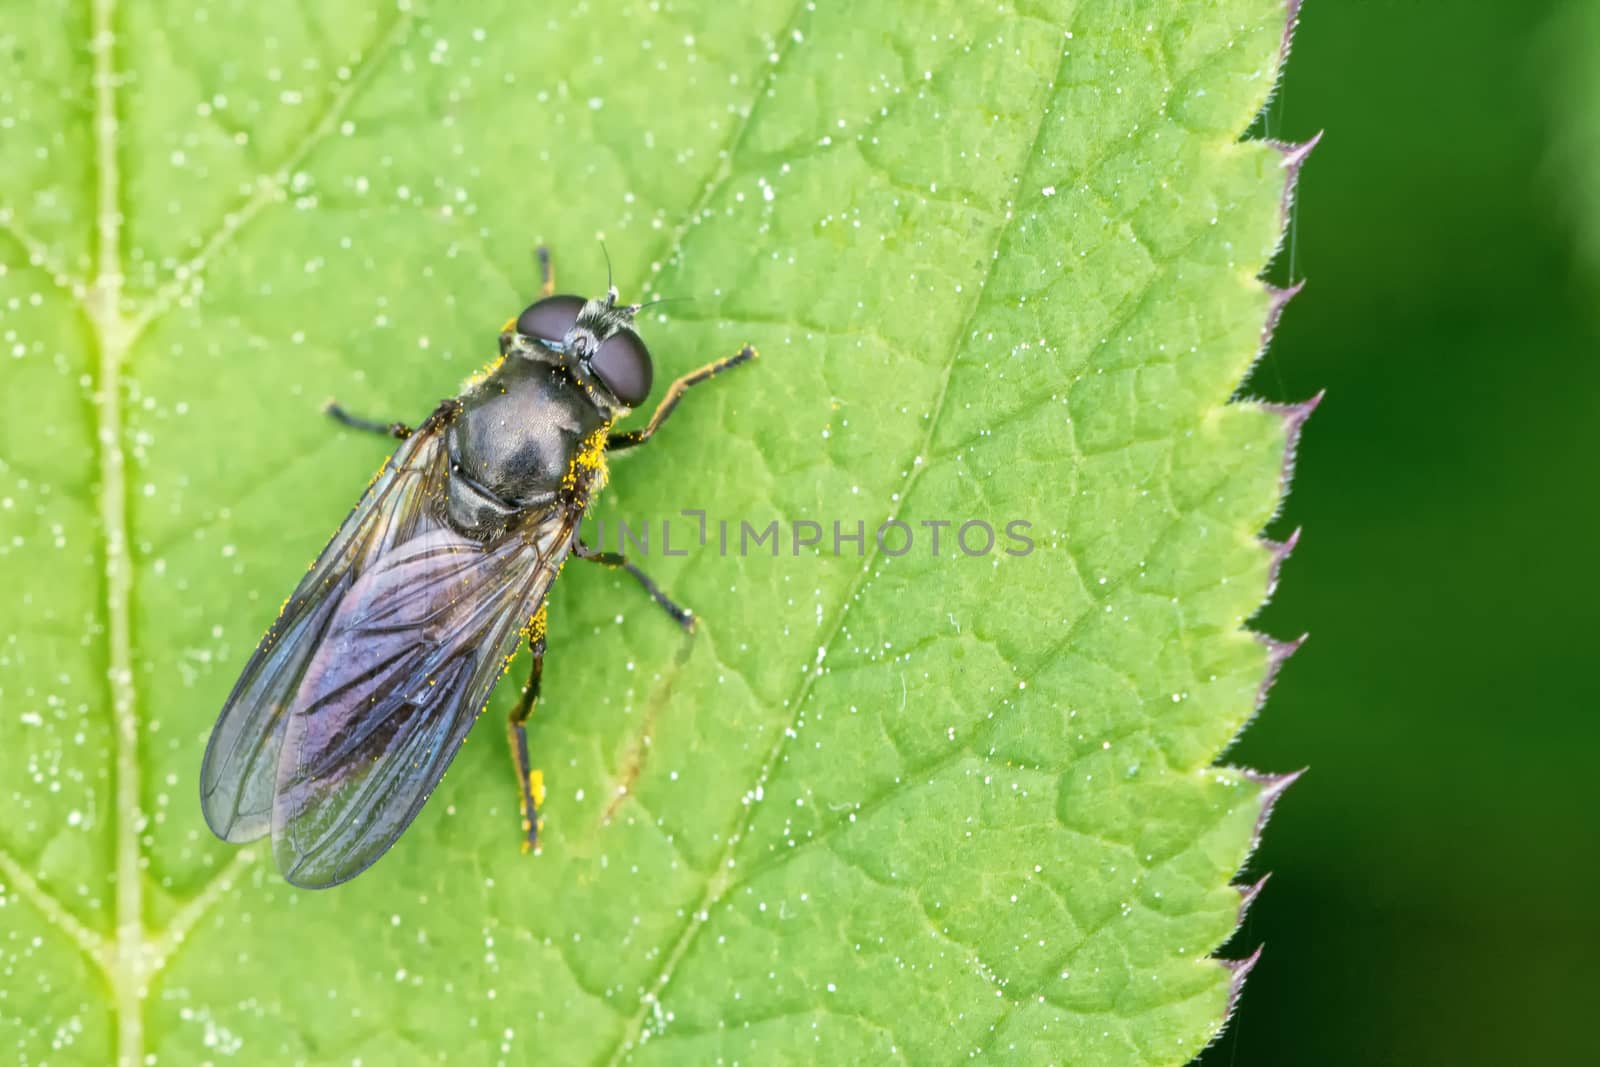 Black insect sitting on the leaf by neryx